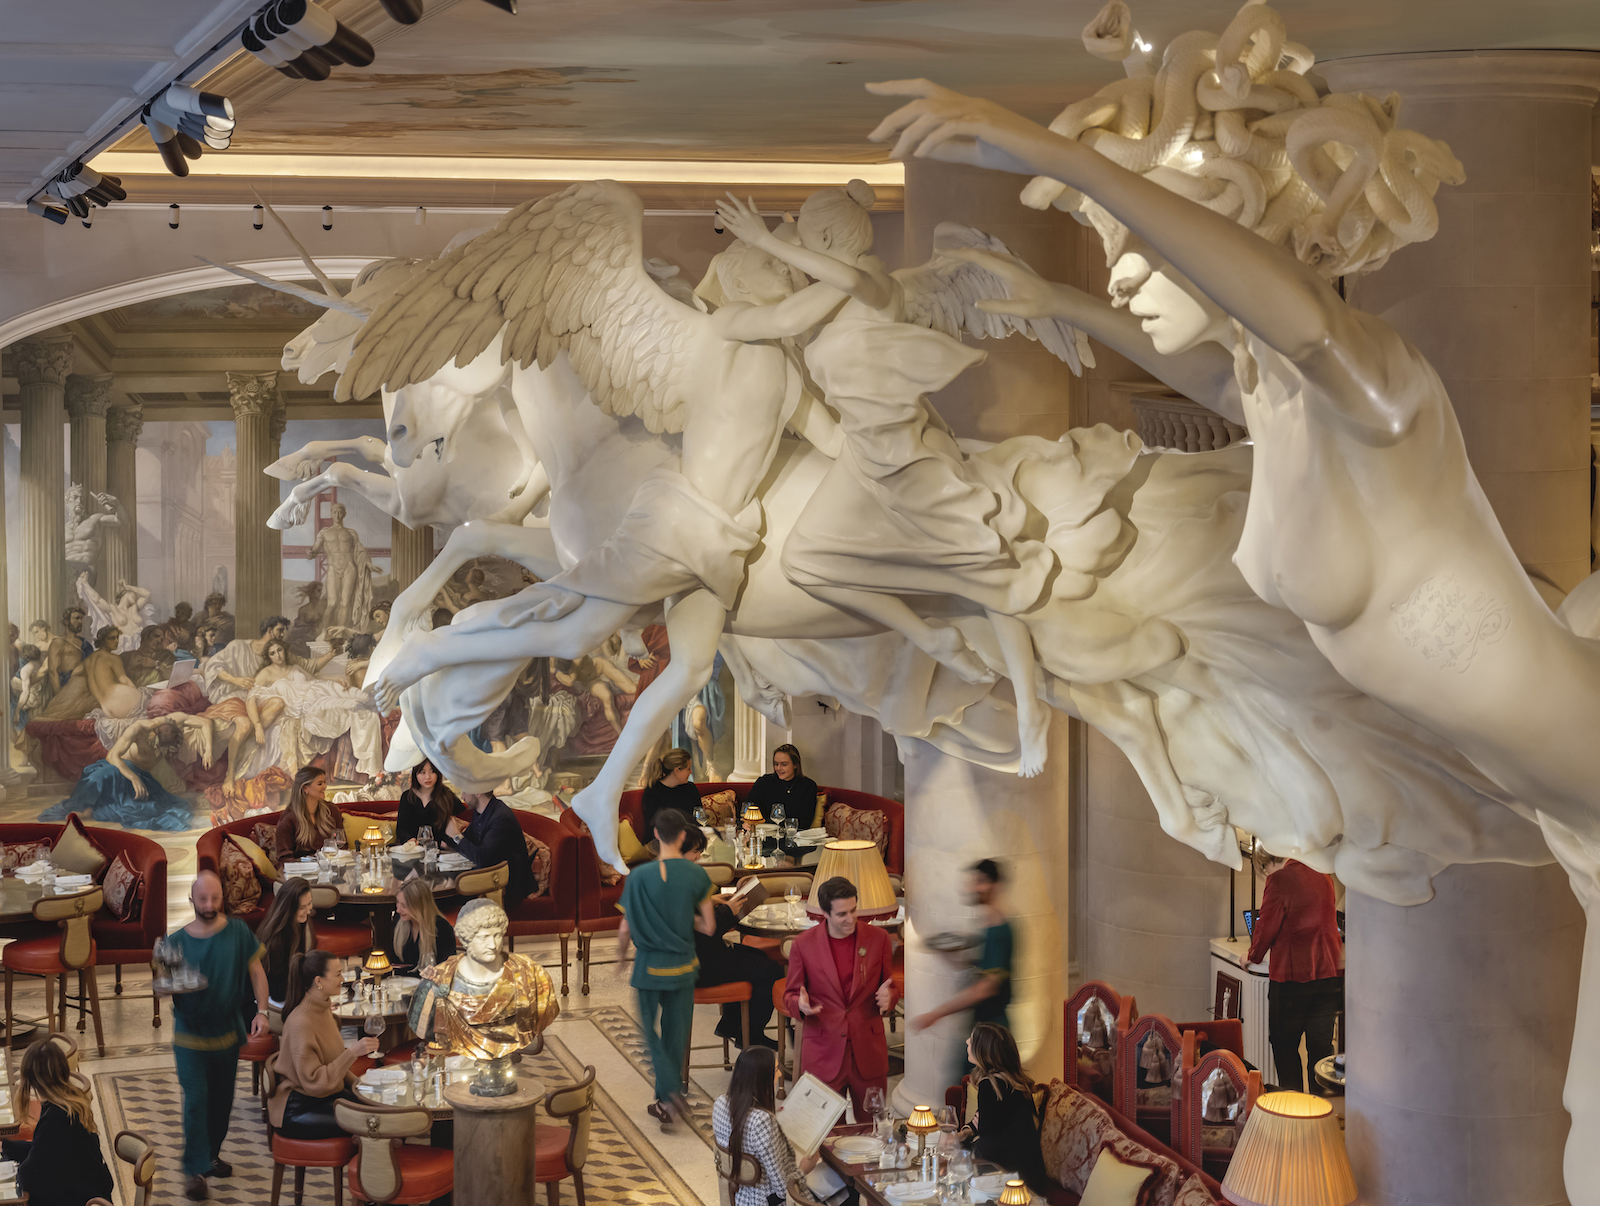 Bacchanalia at launch, with Damien Hirst's statues in the foreground